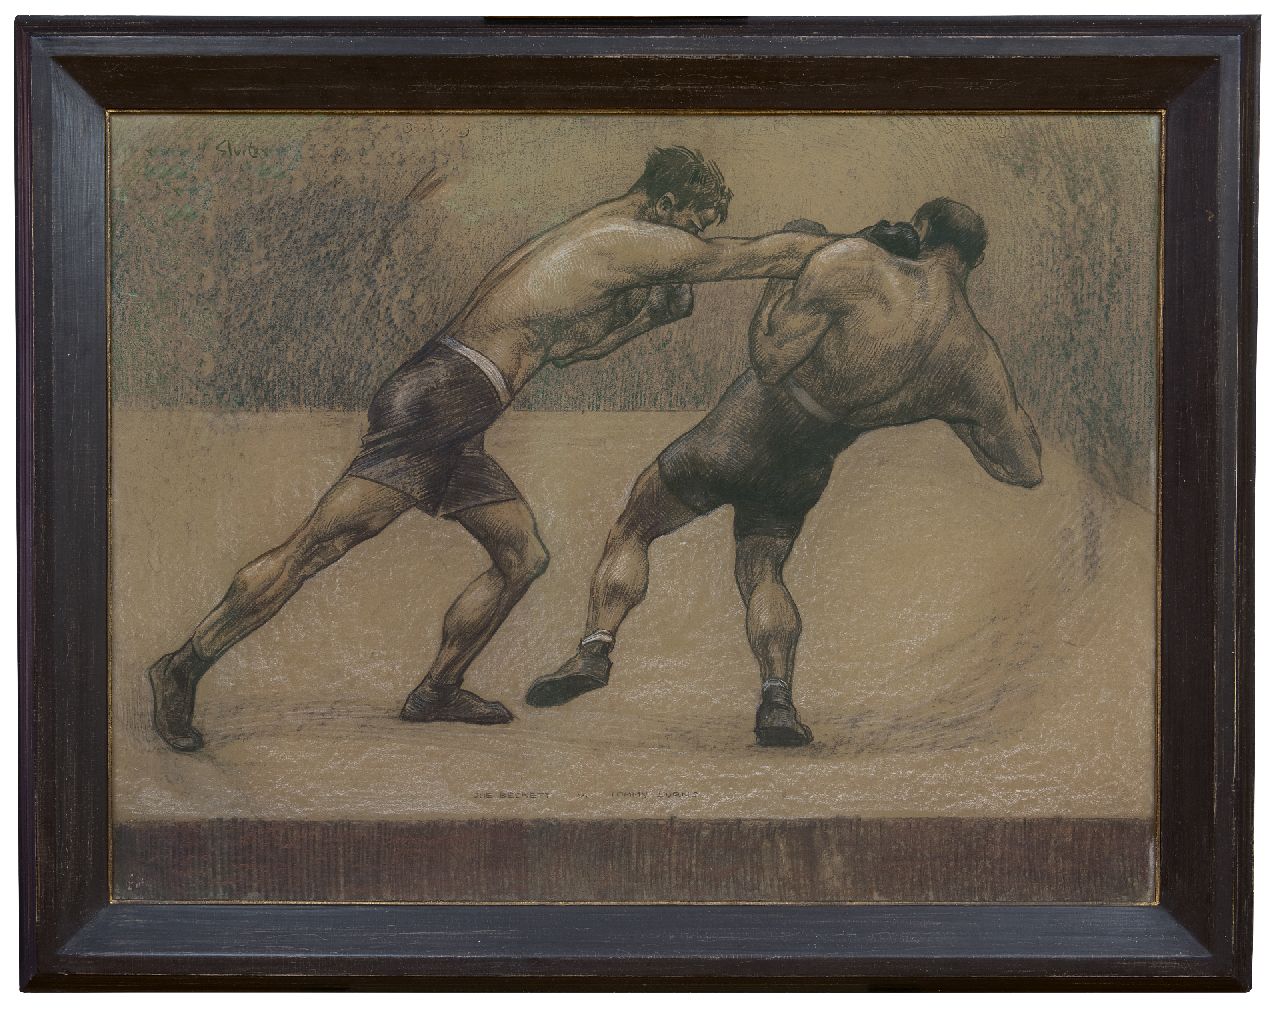 Sluiter J.W.  | Jan Willem 'Willy' Sluiter, The boxing match between Joe Beckett and Tommy Burns, London 1920, charcoal and pastel on paper laid down on board 70.6 x 101.5 cm, signed u.l. and on the reverse with artist's stamp and dated 'London' 1920